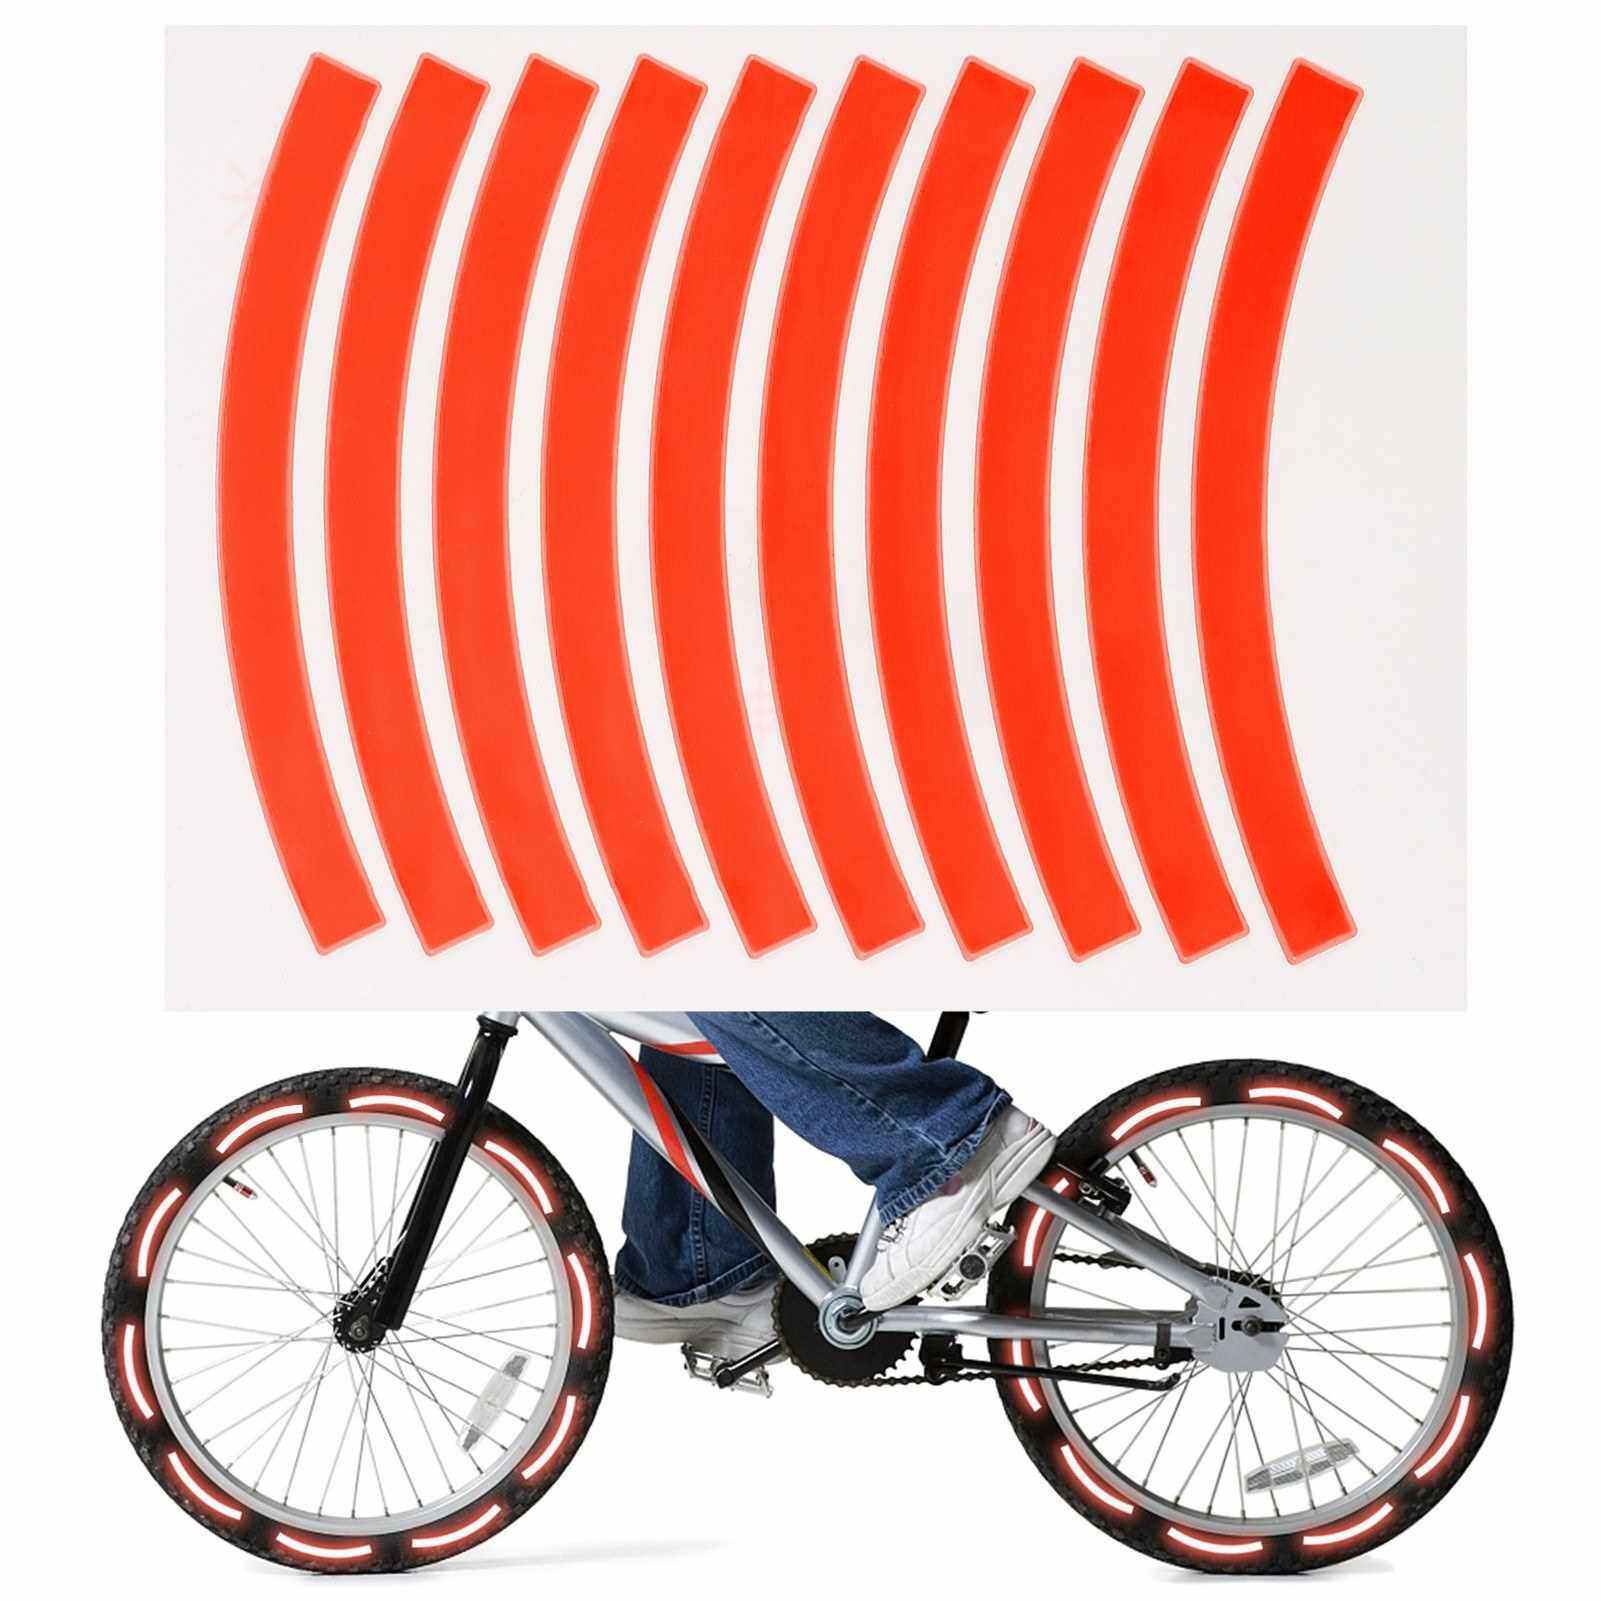 Best Selling 10pcs Adhesive Reflective Tape Cycling Safety Warning Sticker Bike Reflector Tape Strip for Car Bicycle Motorcycle Scooter Wheel Rim Decoration (Dark Orange)